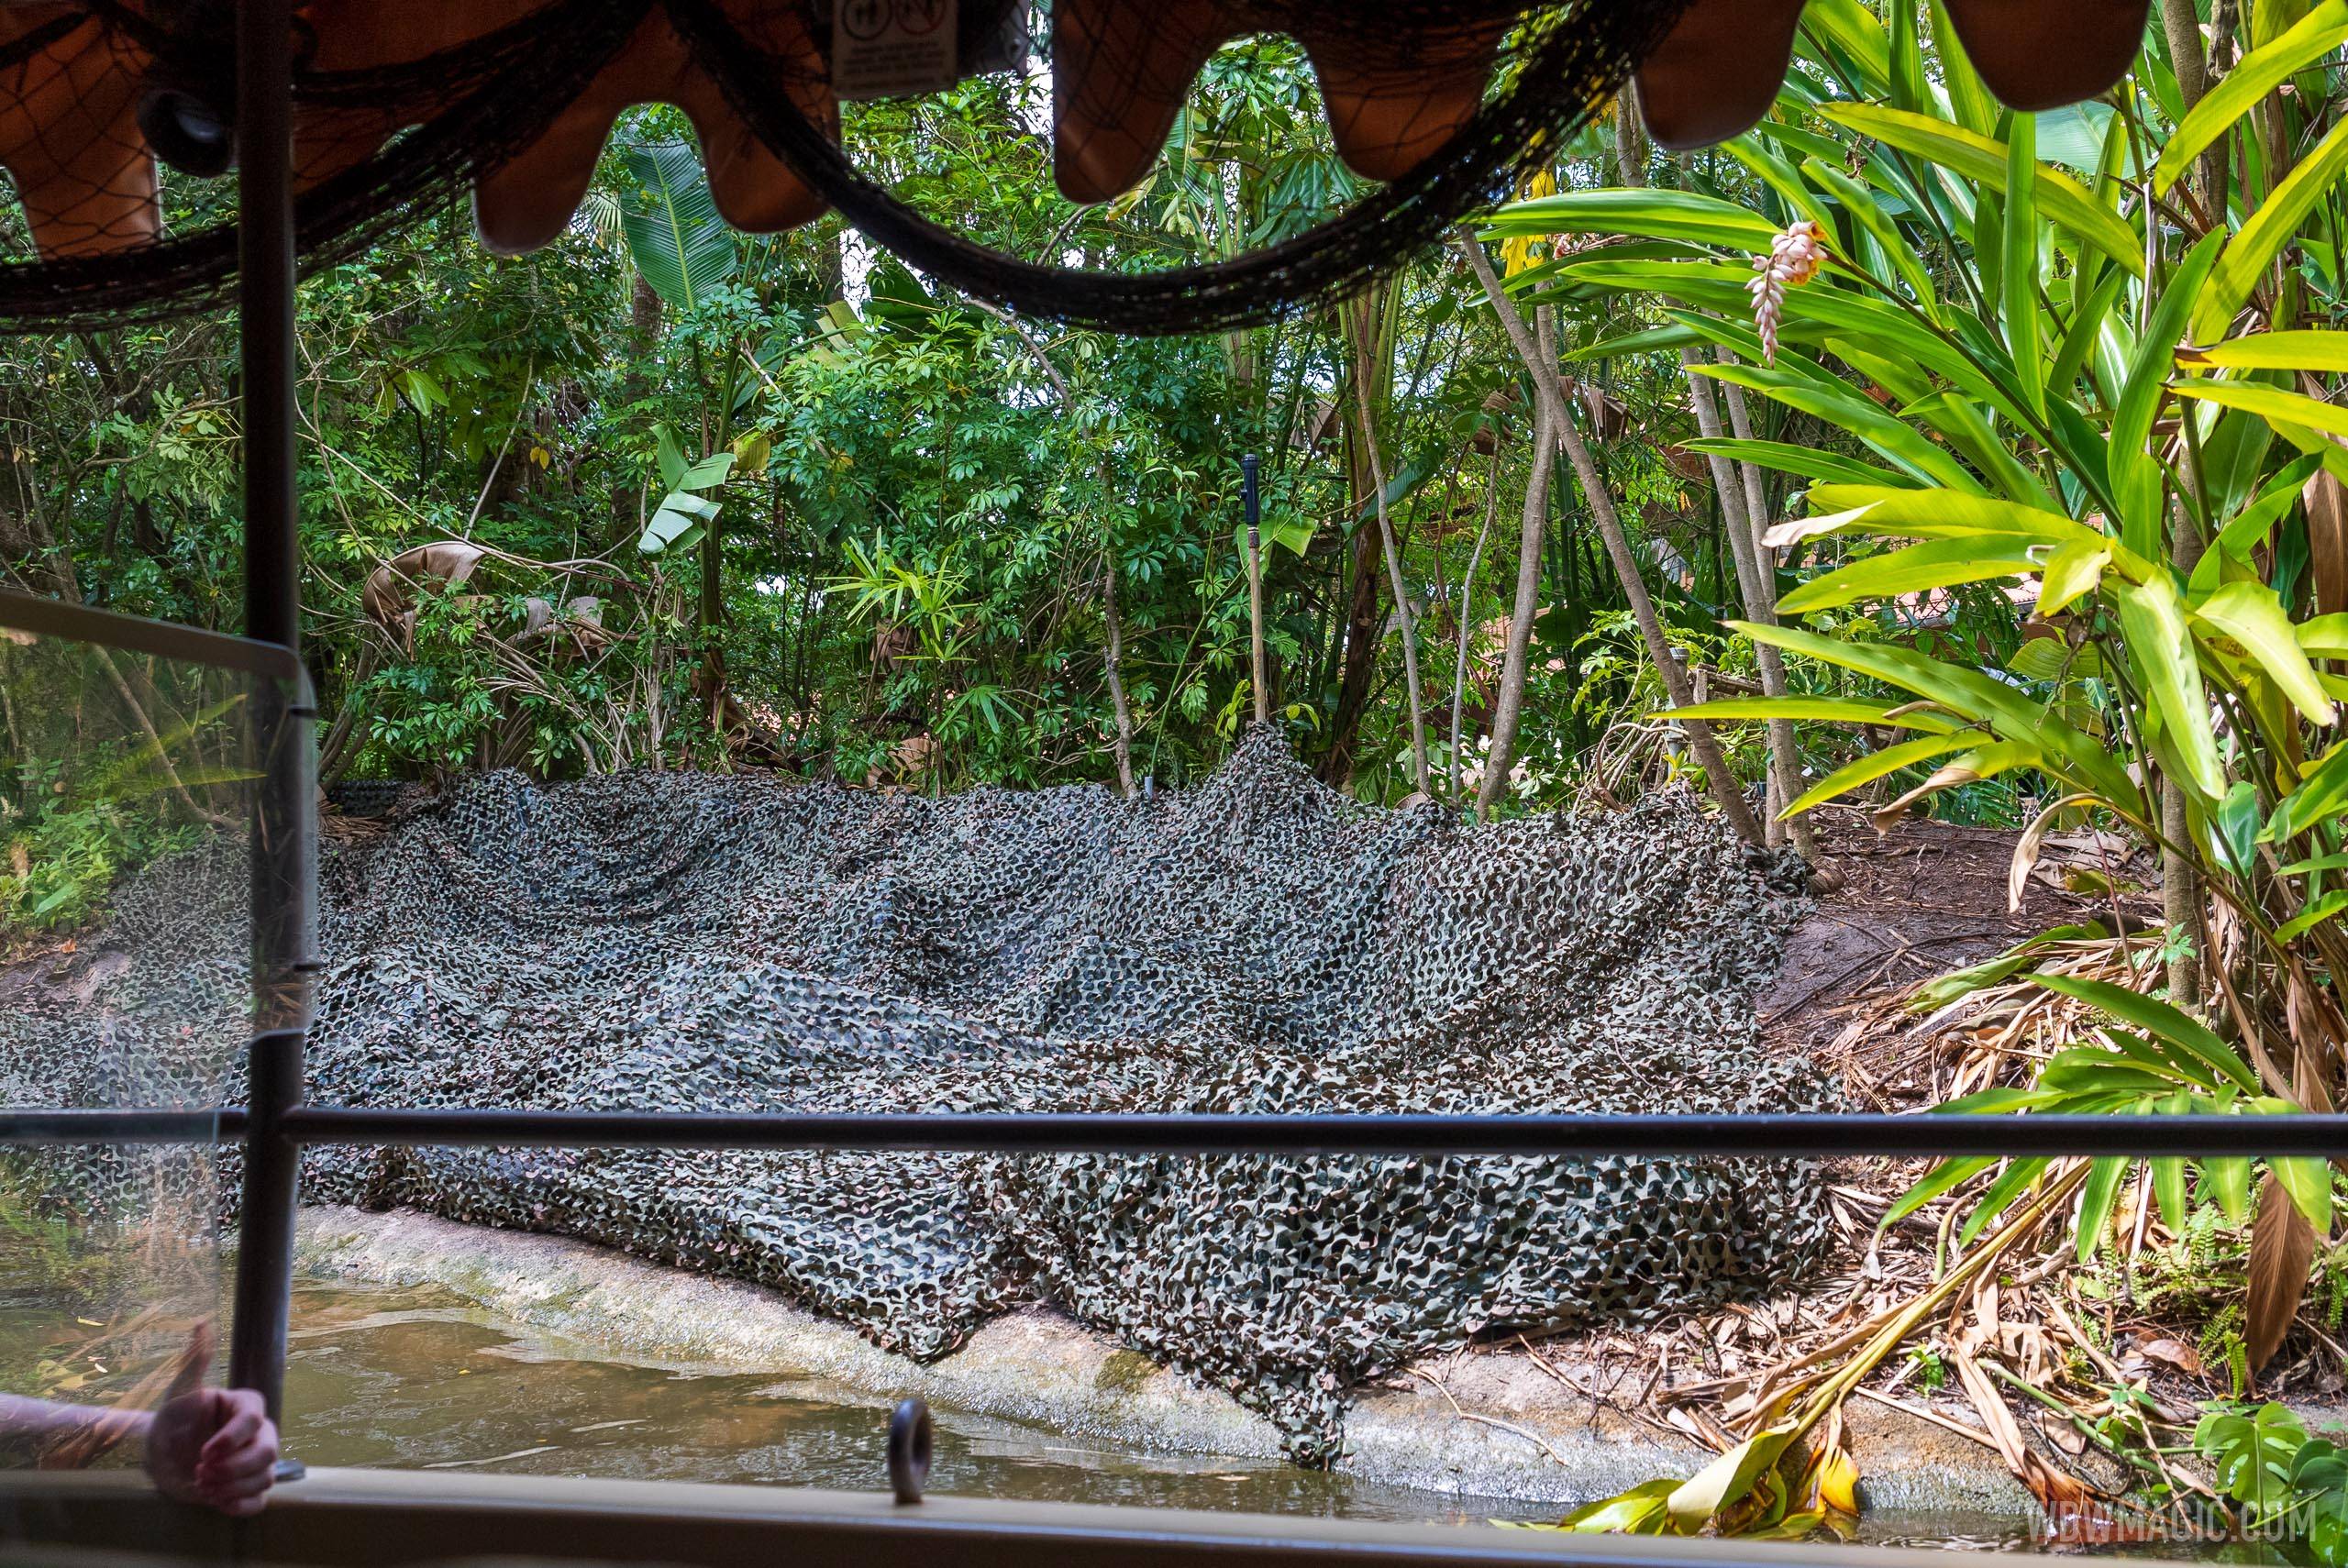 Summary of the changes so far at Disney World's Jungle Cruise